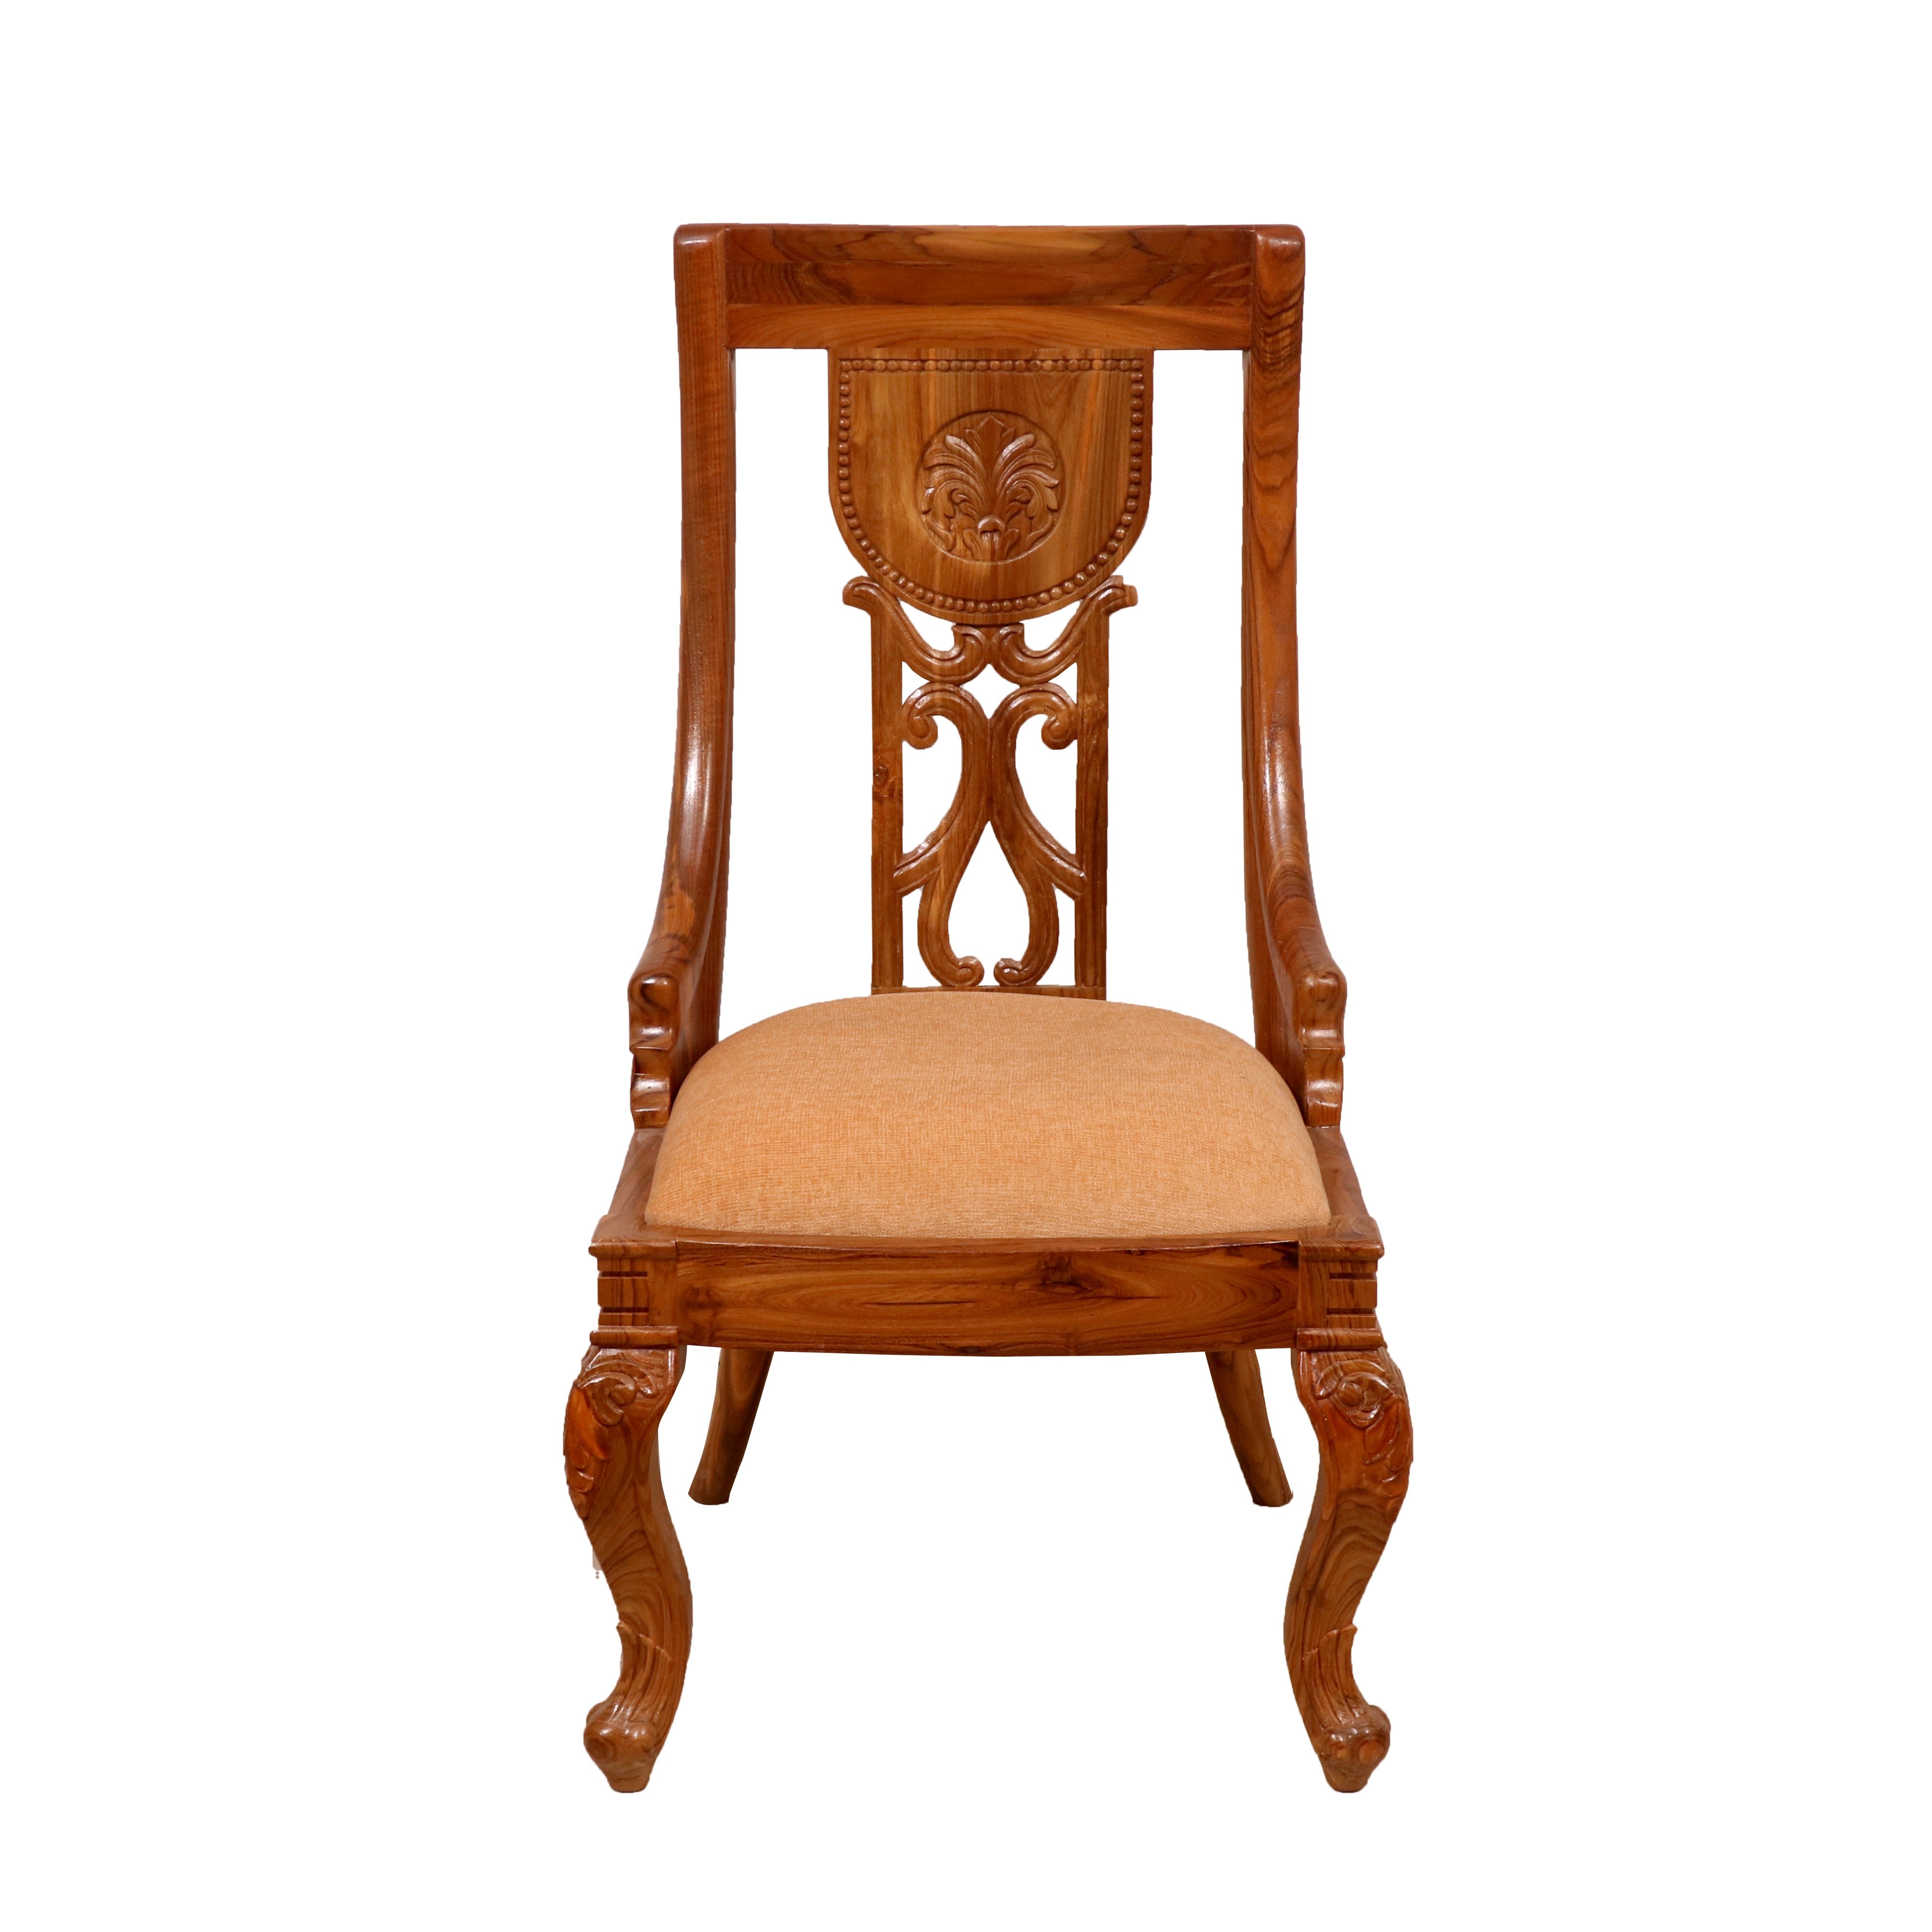 (Set of 2) Regal Carved Wooden Chair Dining Chair